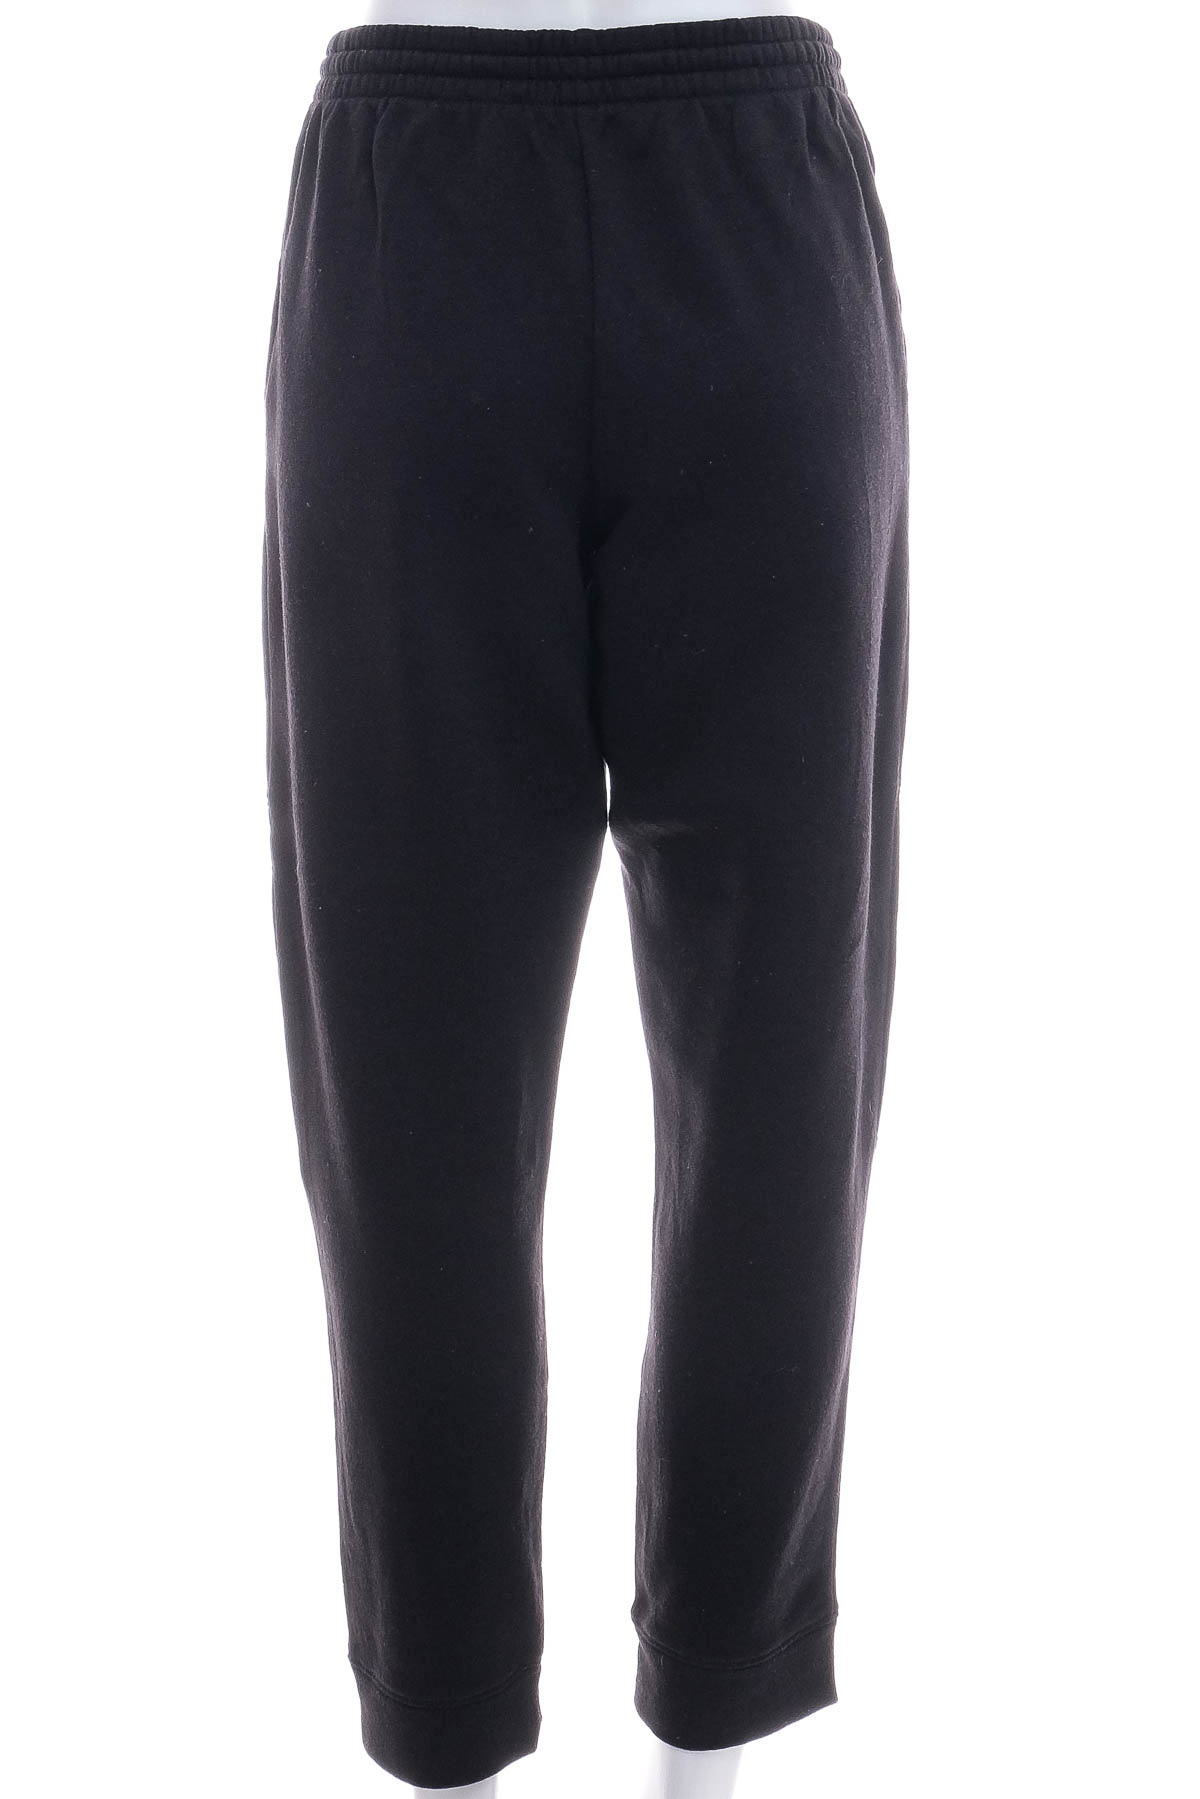 Track Bottoms for Boy - XERSION - 1